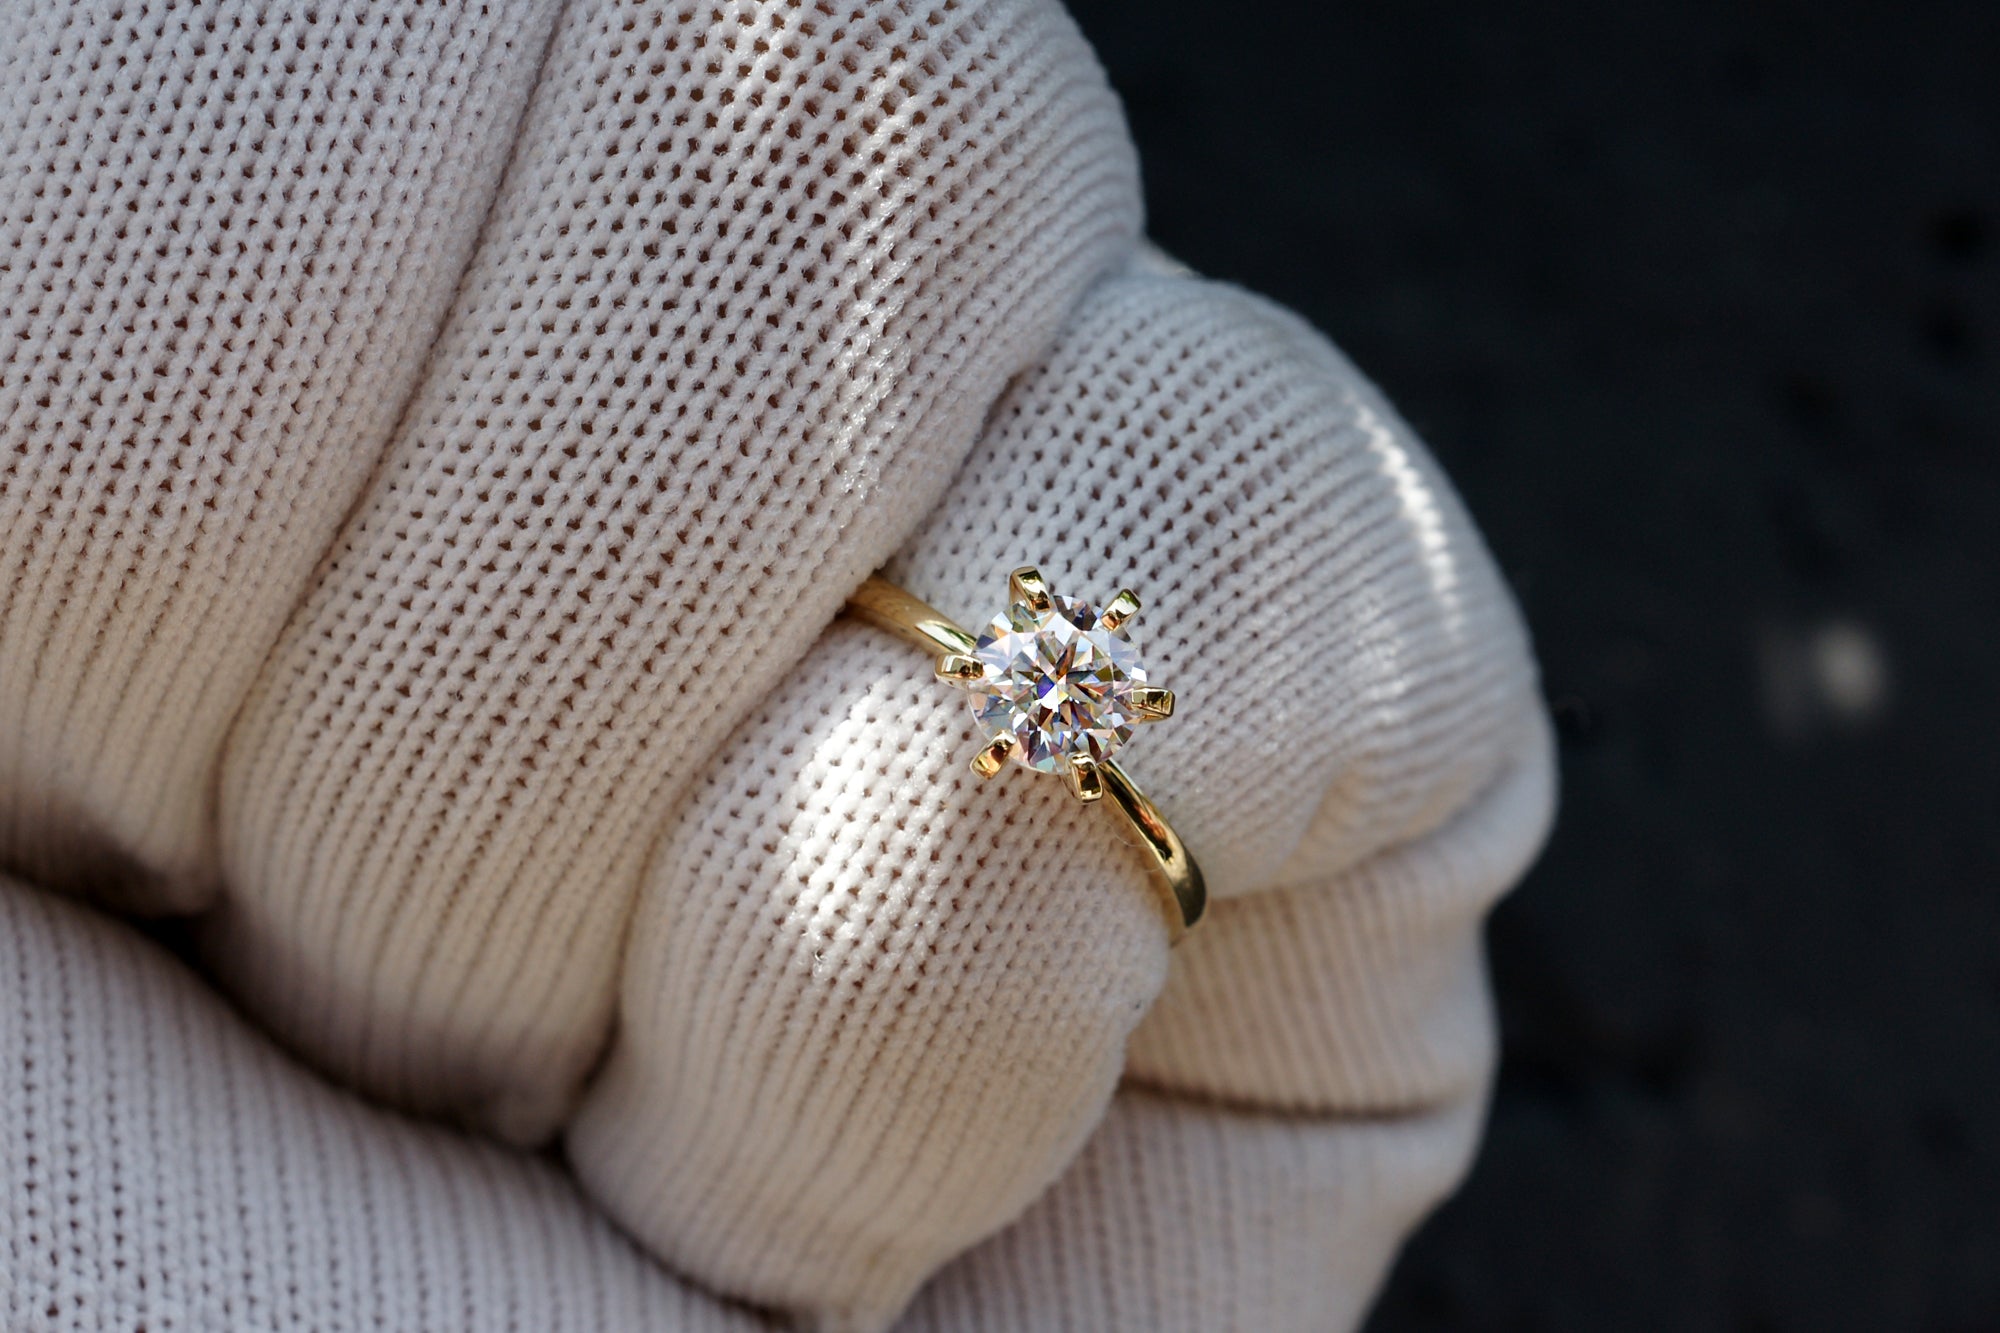 The Adeline Round Moissanite 6mm 18k yellow gold